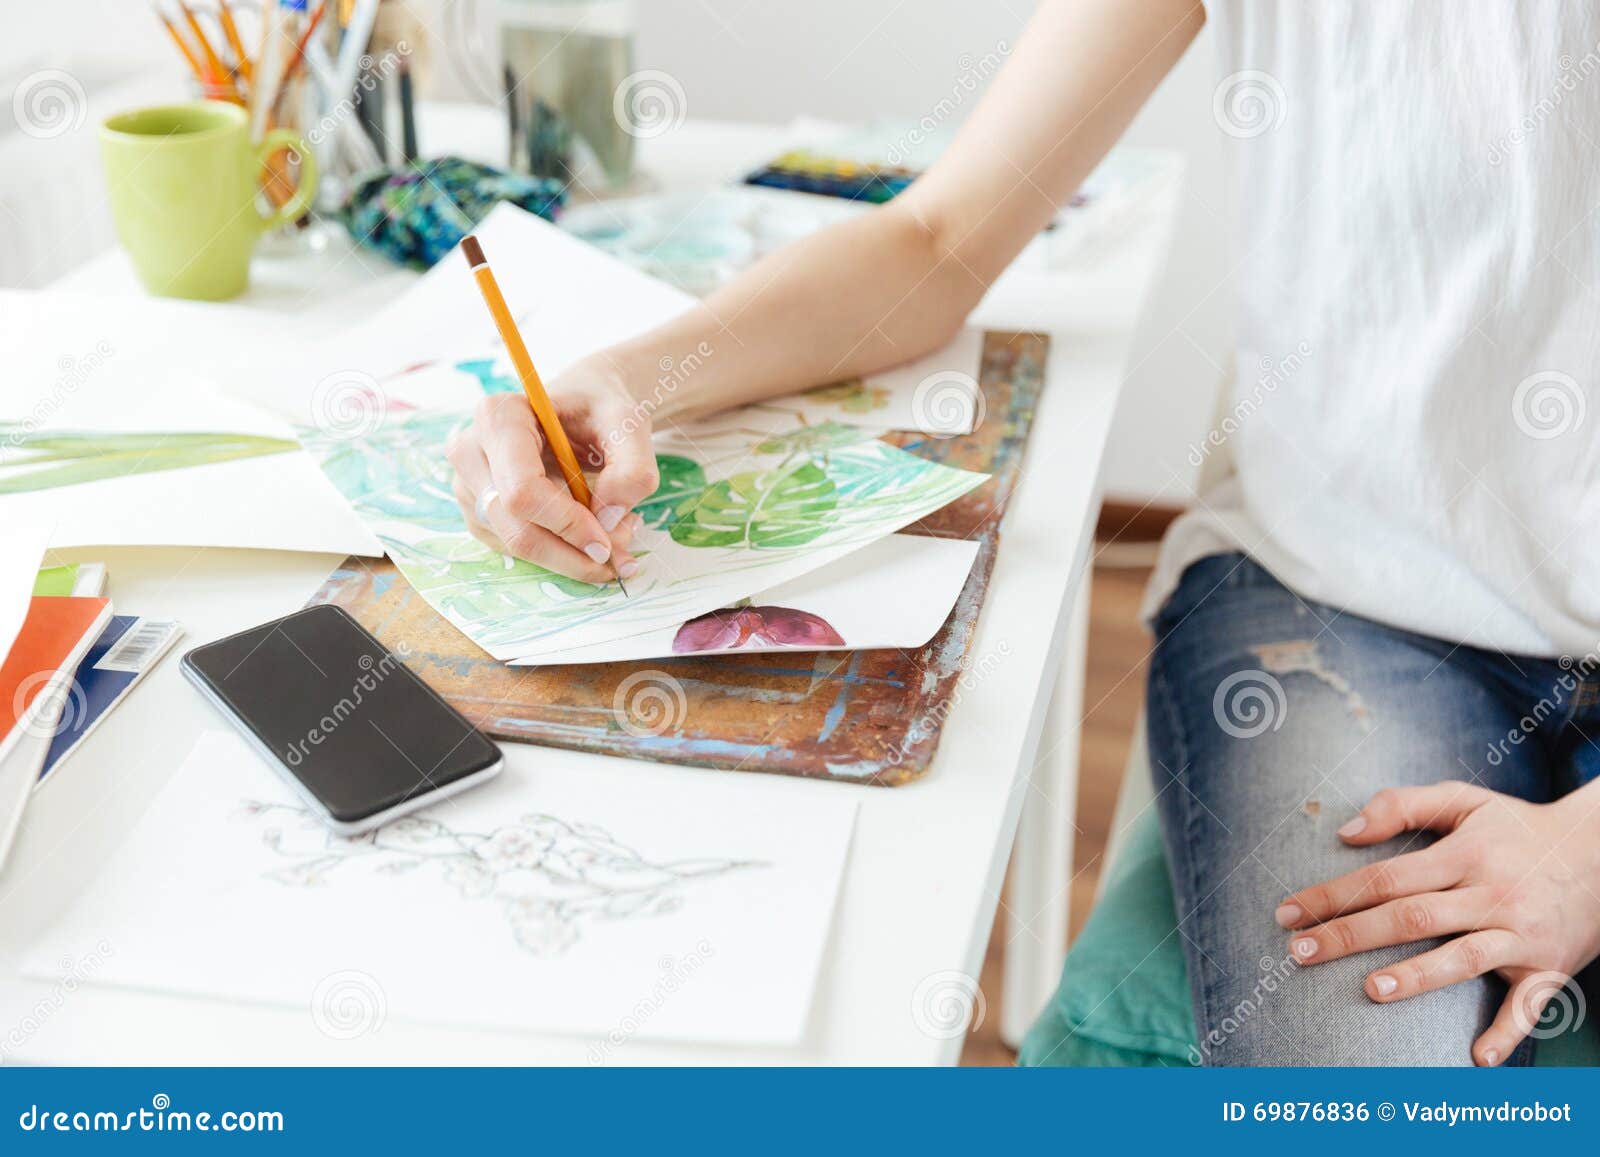 Woman Painter Drawing in Art Studio Stock Photo - Image of female ...